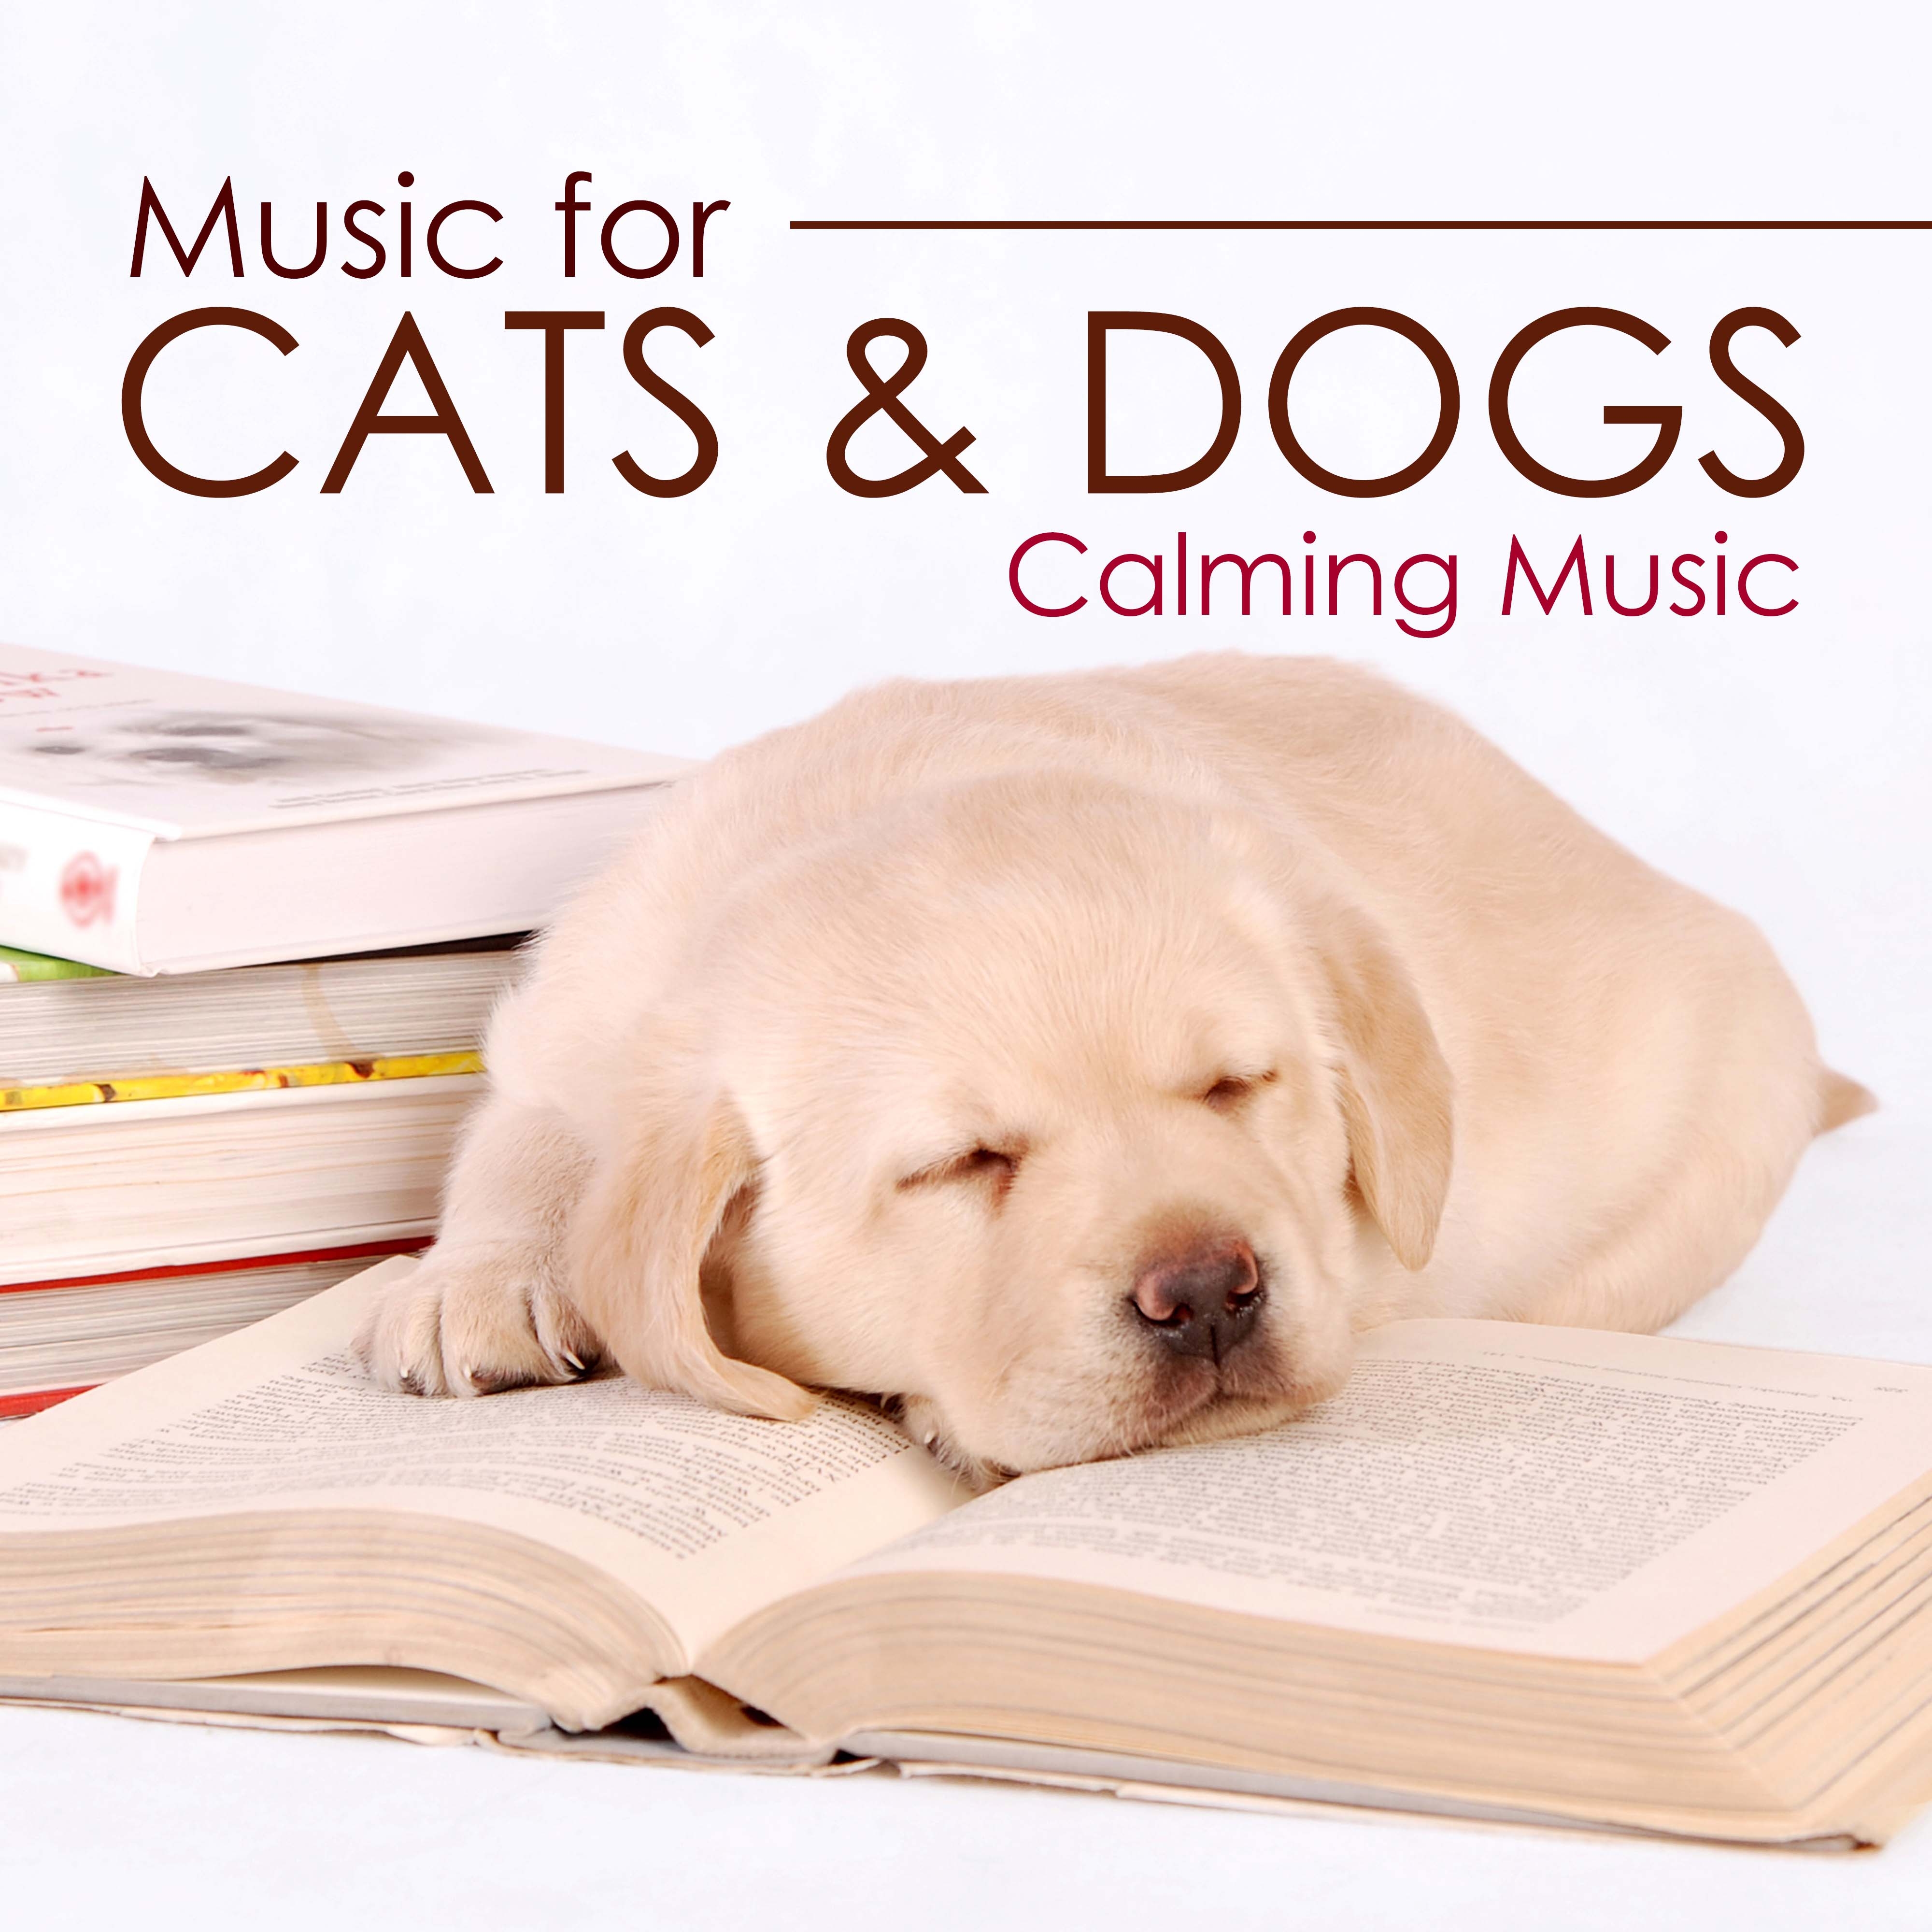 Music for Cats and Dogs - Calming Music for your Pets